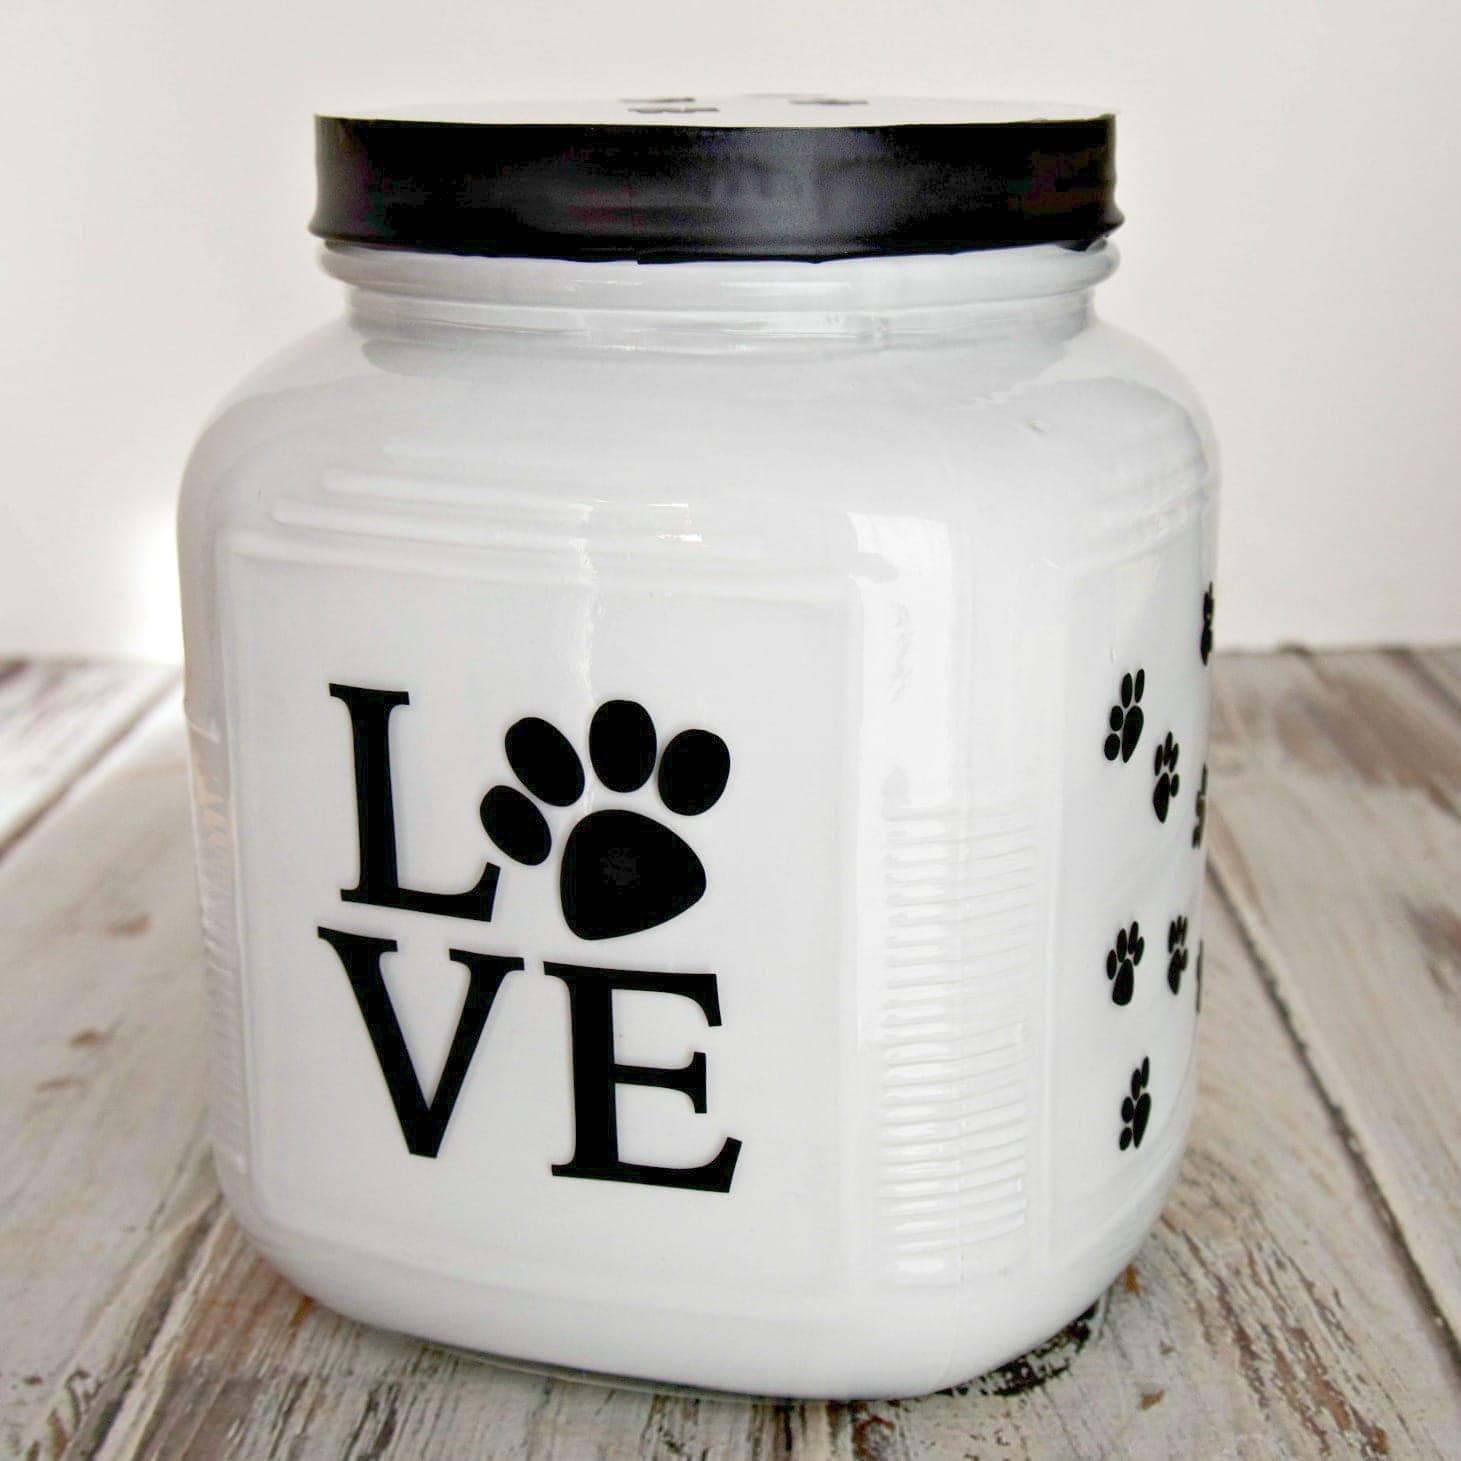 Dog Treat Jar - this container is the perfect jar for your furry friend's cookies